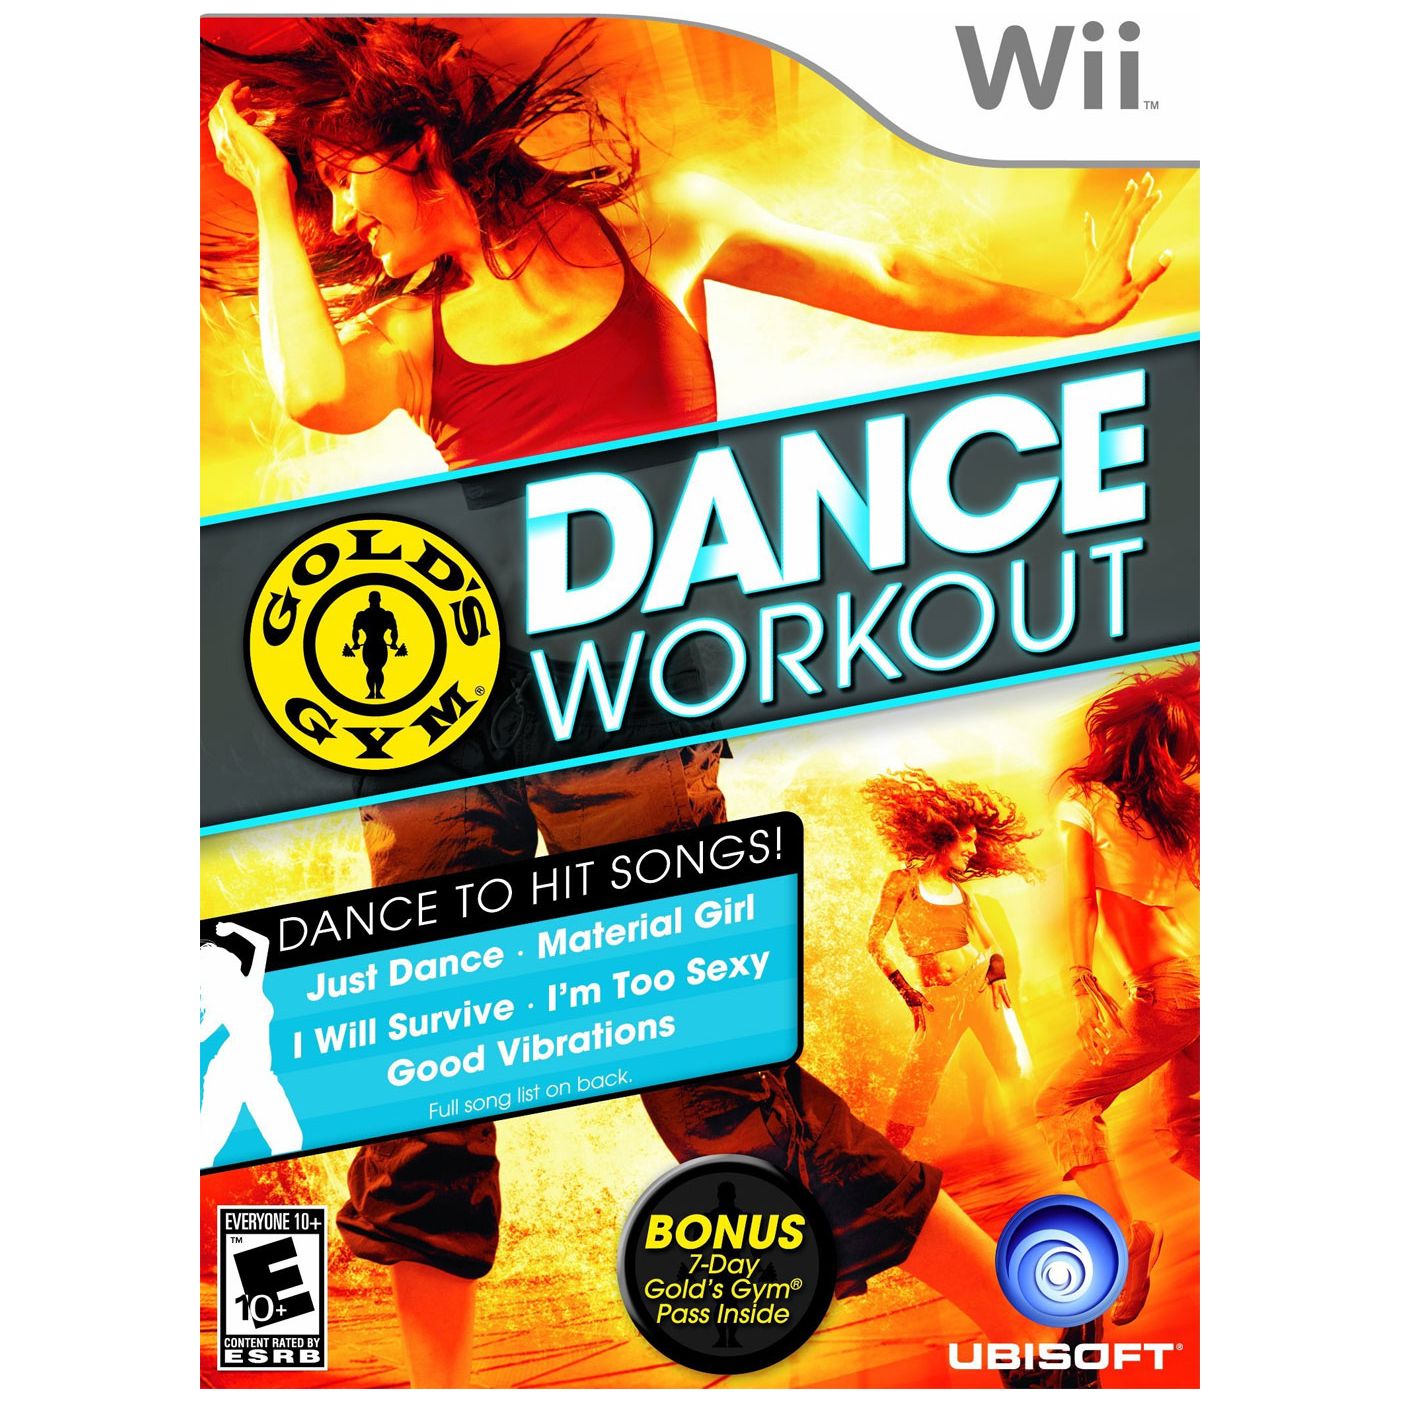 GOLDS GYM DANCE WORKOUT (used)